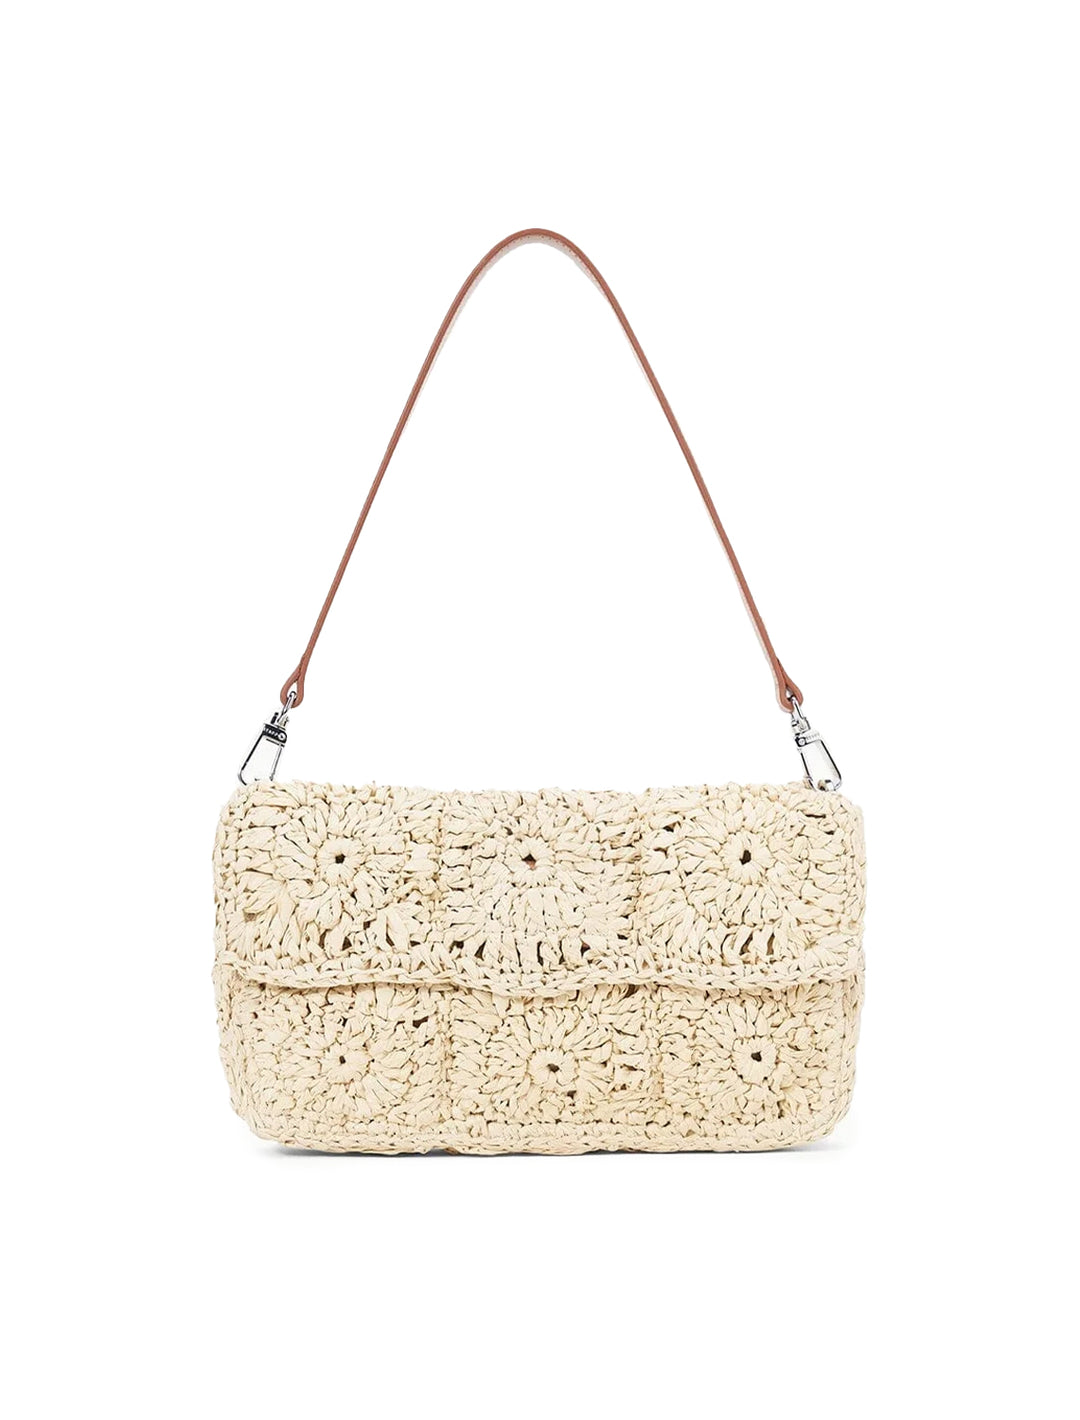 Front view of STAUD's timmy crochet shoulder bag in natural.